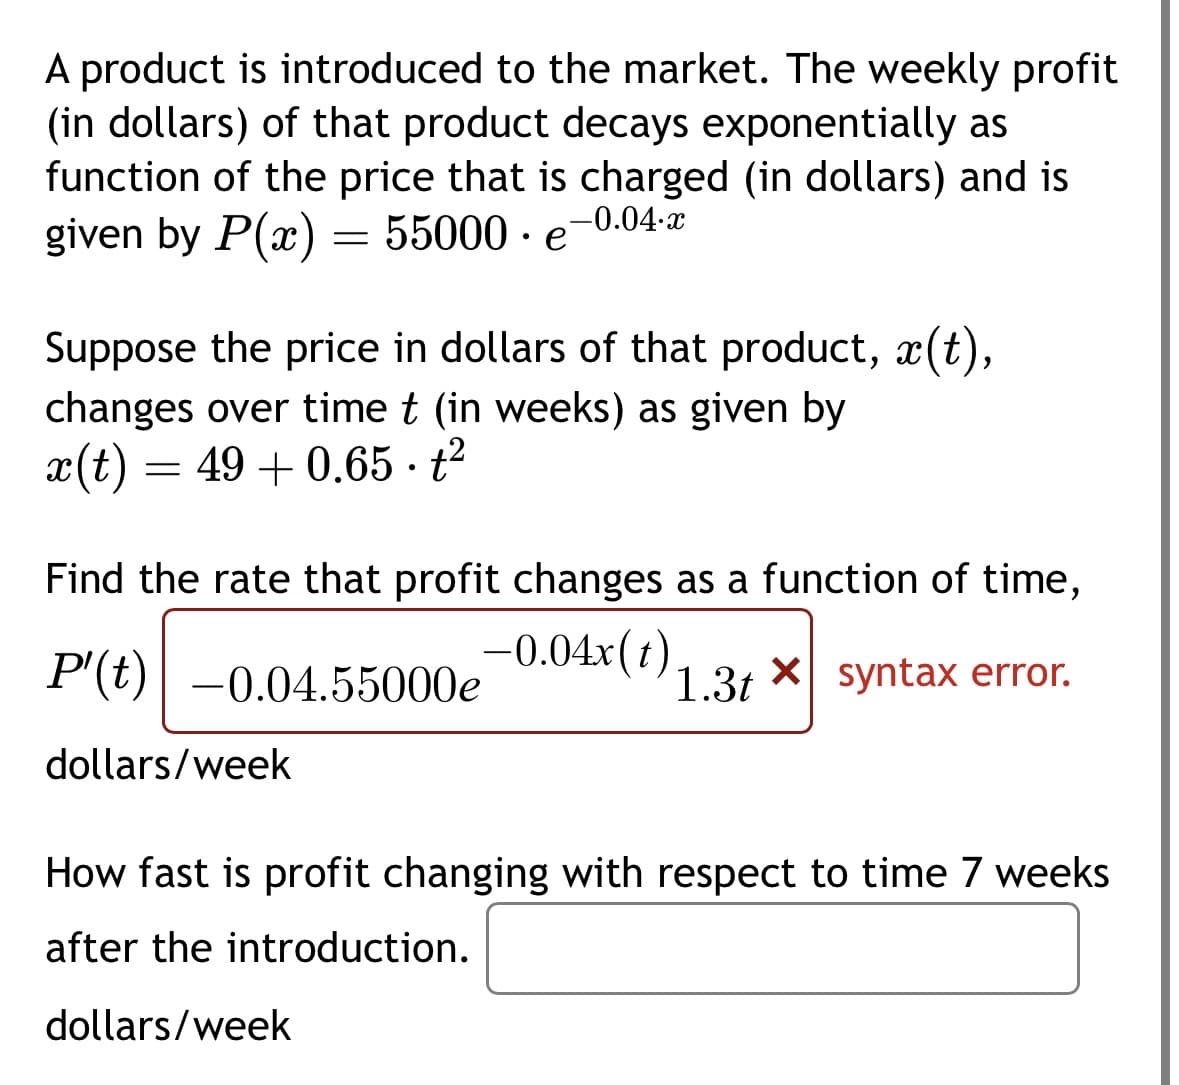 A product is introduced to the market. The weekly profit
(in dollars) of that product decays exponentially as
function of the price that is charged (in dollars) and is
given by P(x) = 55000 e
-0.04.x
●
Suppose the price in dollars of that product, ä(t),
changes over time t (in weeks) as given by
49+0.65t²
x(t)
=
Find the rate that profit changes as a function of time,
P'(t) -0.04.55000e -0.04x(1) 1.3 × syntax error.
dollars/week
How fast is profit changing with respect to time 7 weeks
after the introduction.
dollars/week